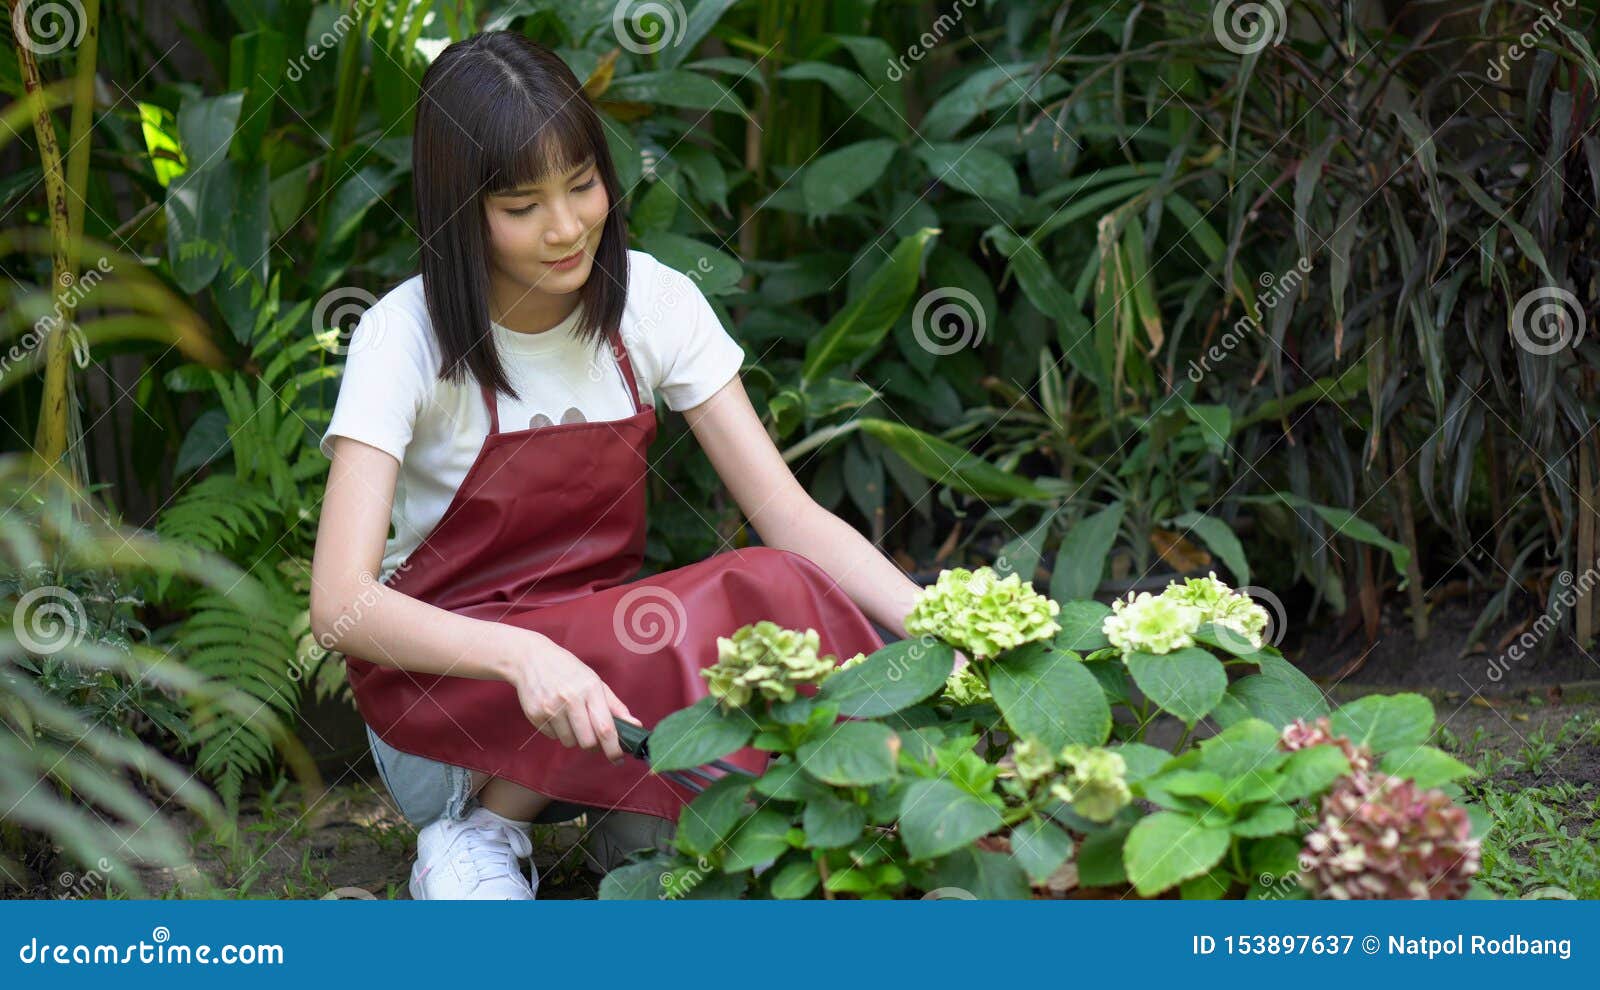 Attractive Asian Woman In Apron Gardener Planting Flowers In Garden Young Florist Gardening Stock Image Image Of Green Horticulture 153897637